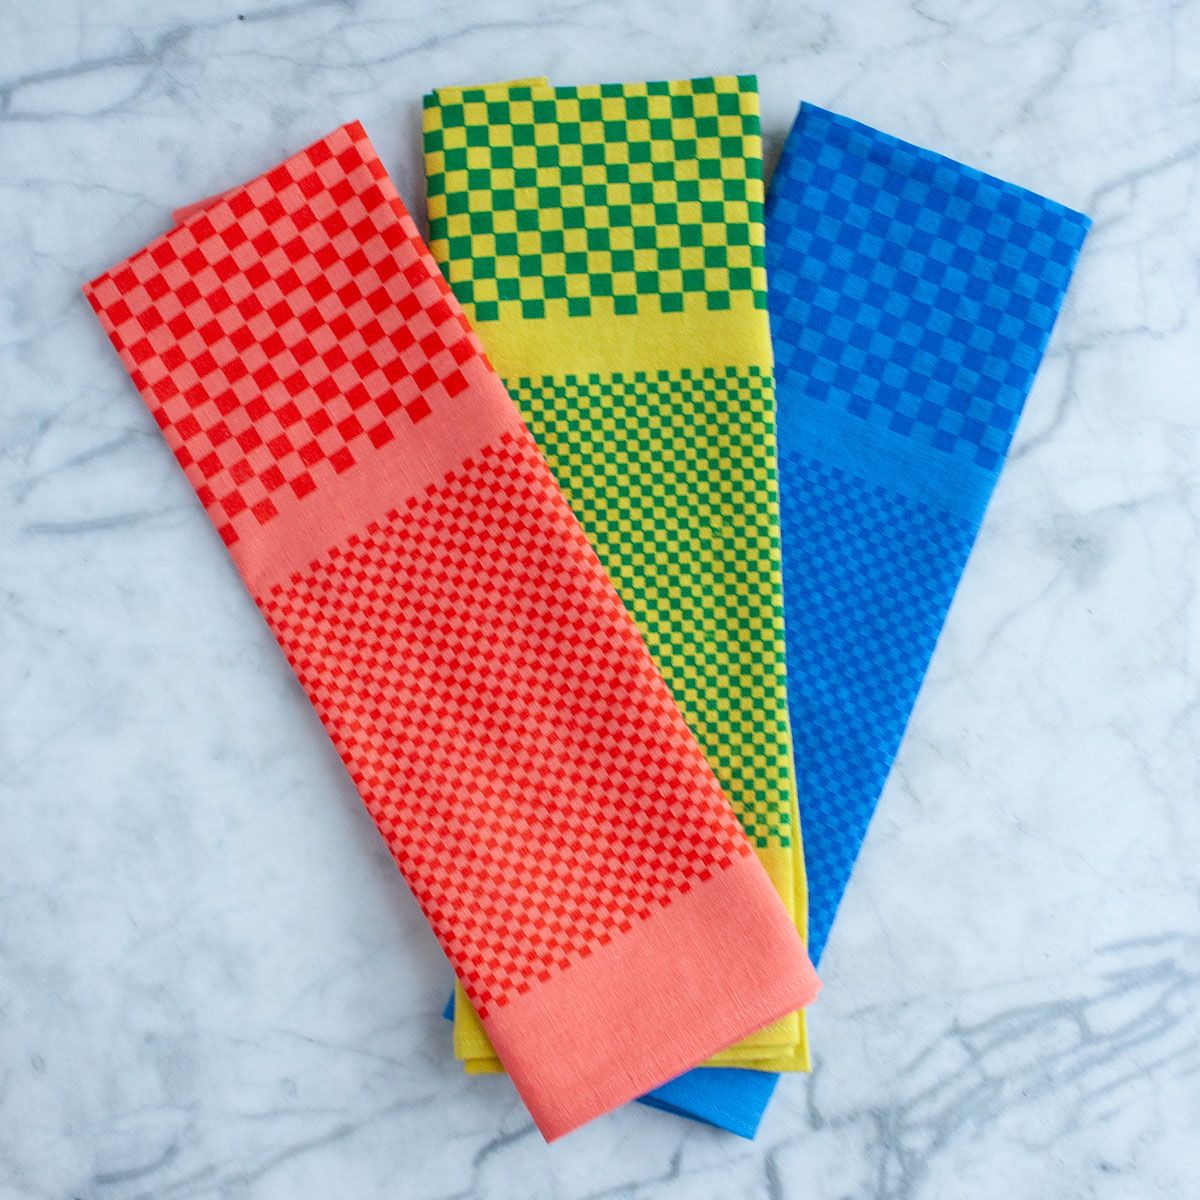 Three linen tea towels with monochromatic checker prints are fanned out and resting on a marble table top. The towels are shown, from left to right, in coral, green, and cobalt.